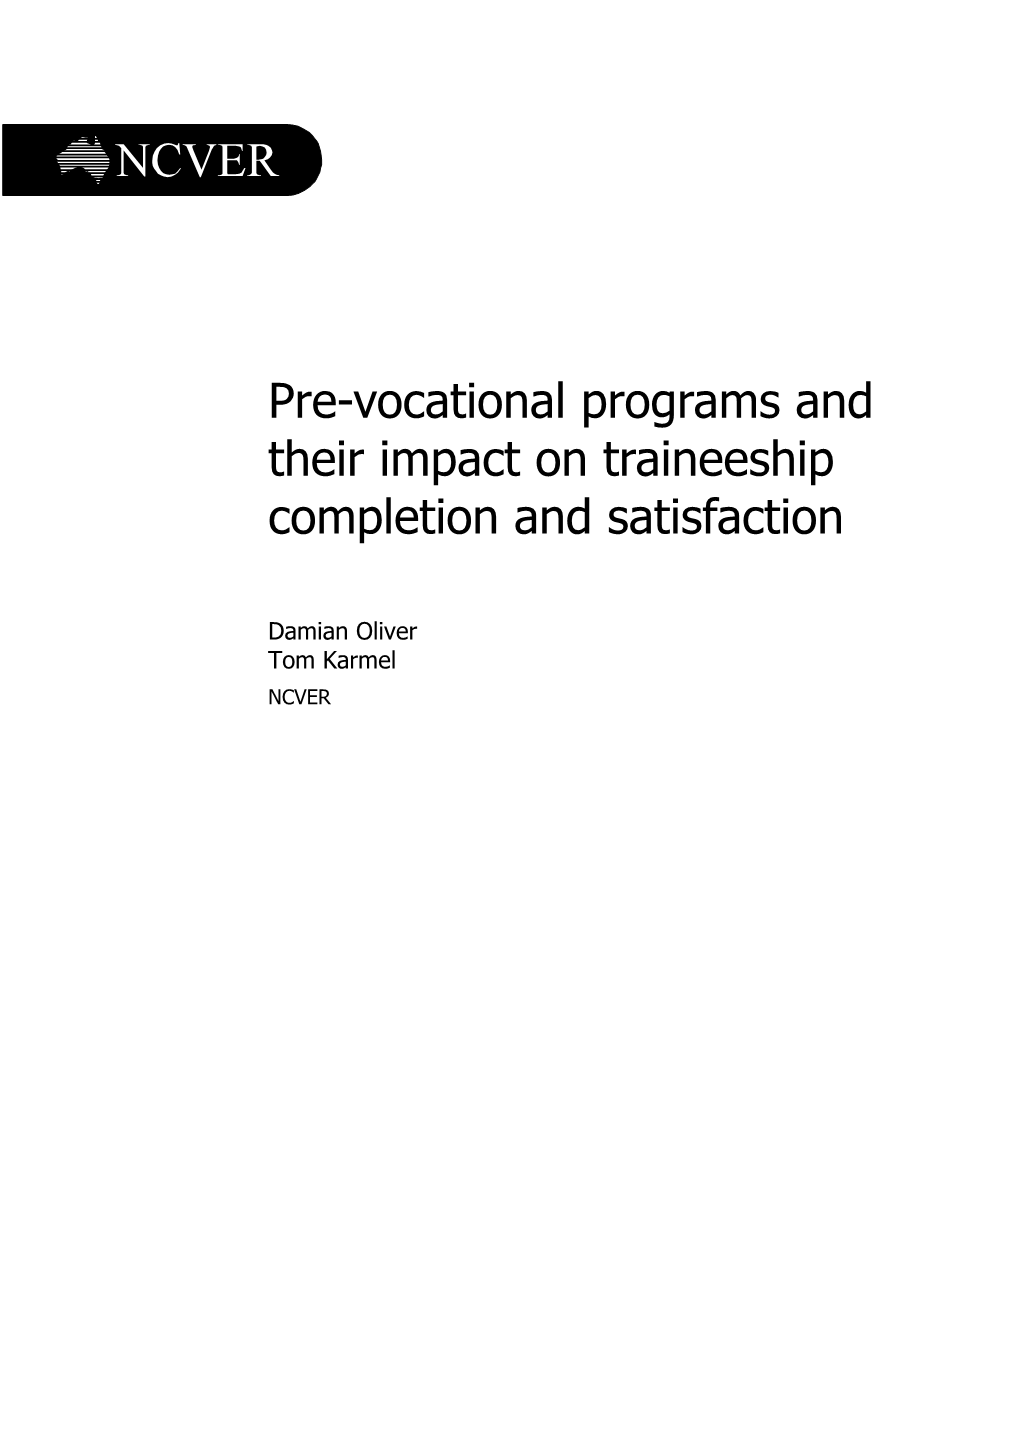 Pre-Vocational Programs and Their Impact on Traineeship Completion and Satisfaction